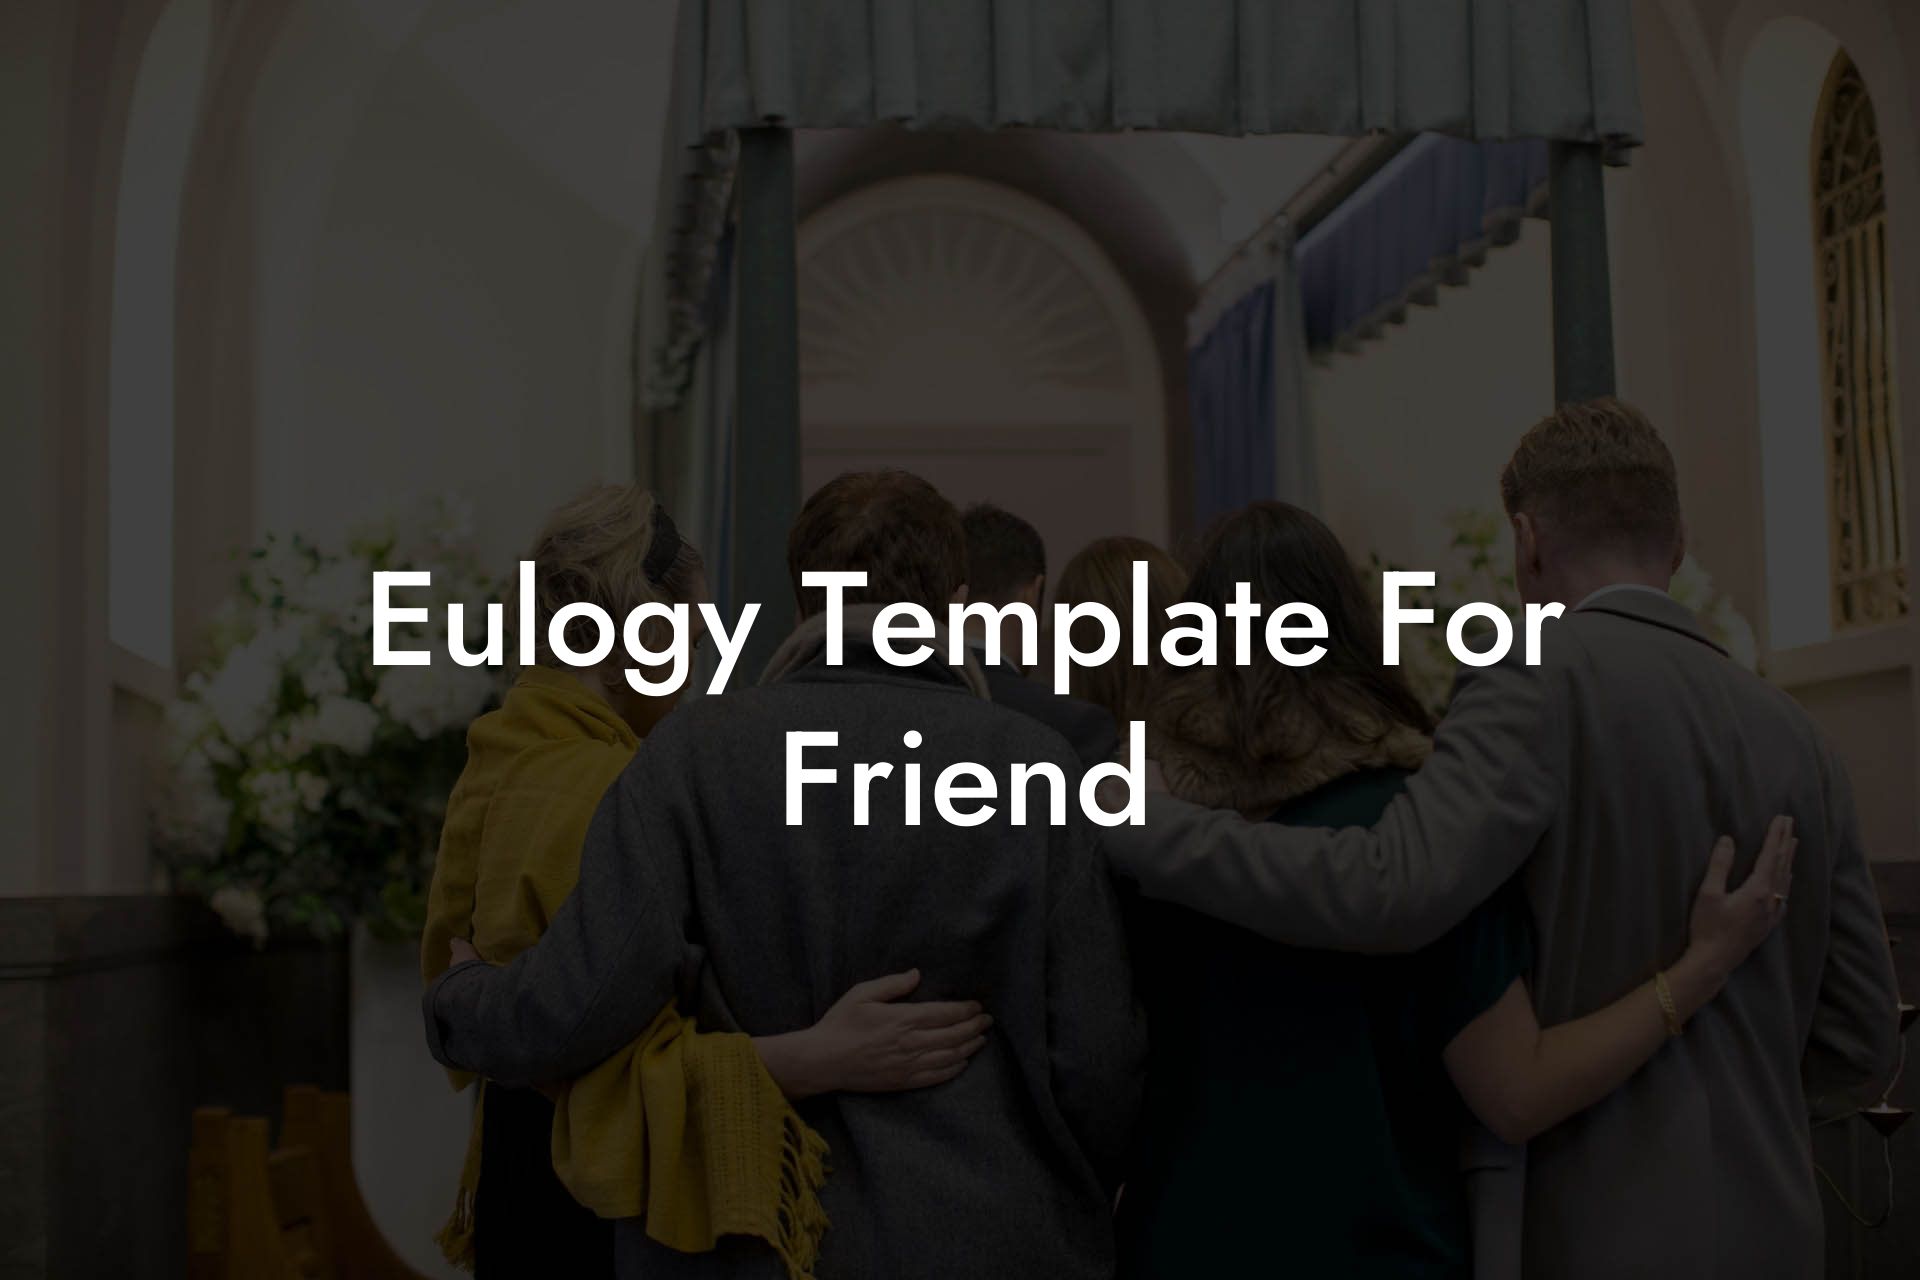 Eulogy Template For Friend